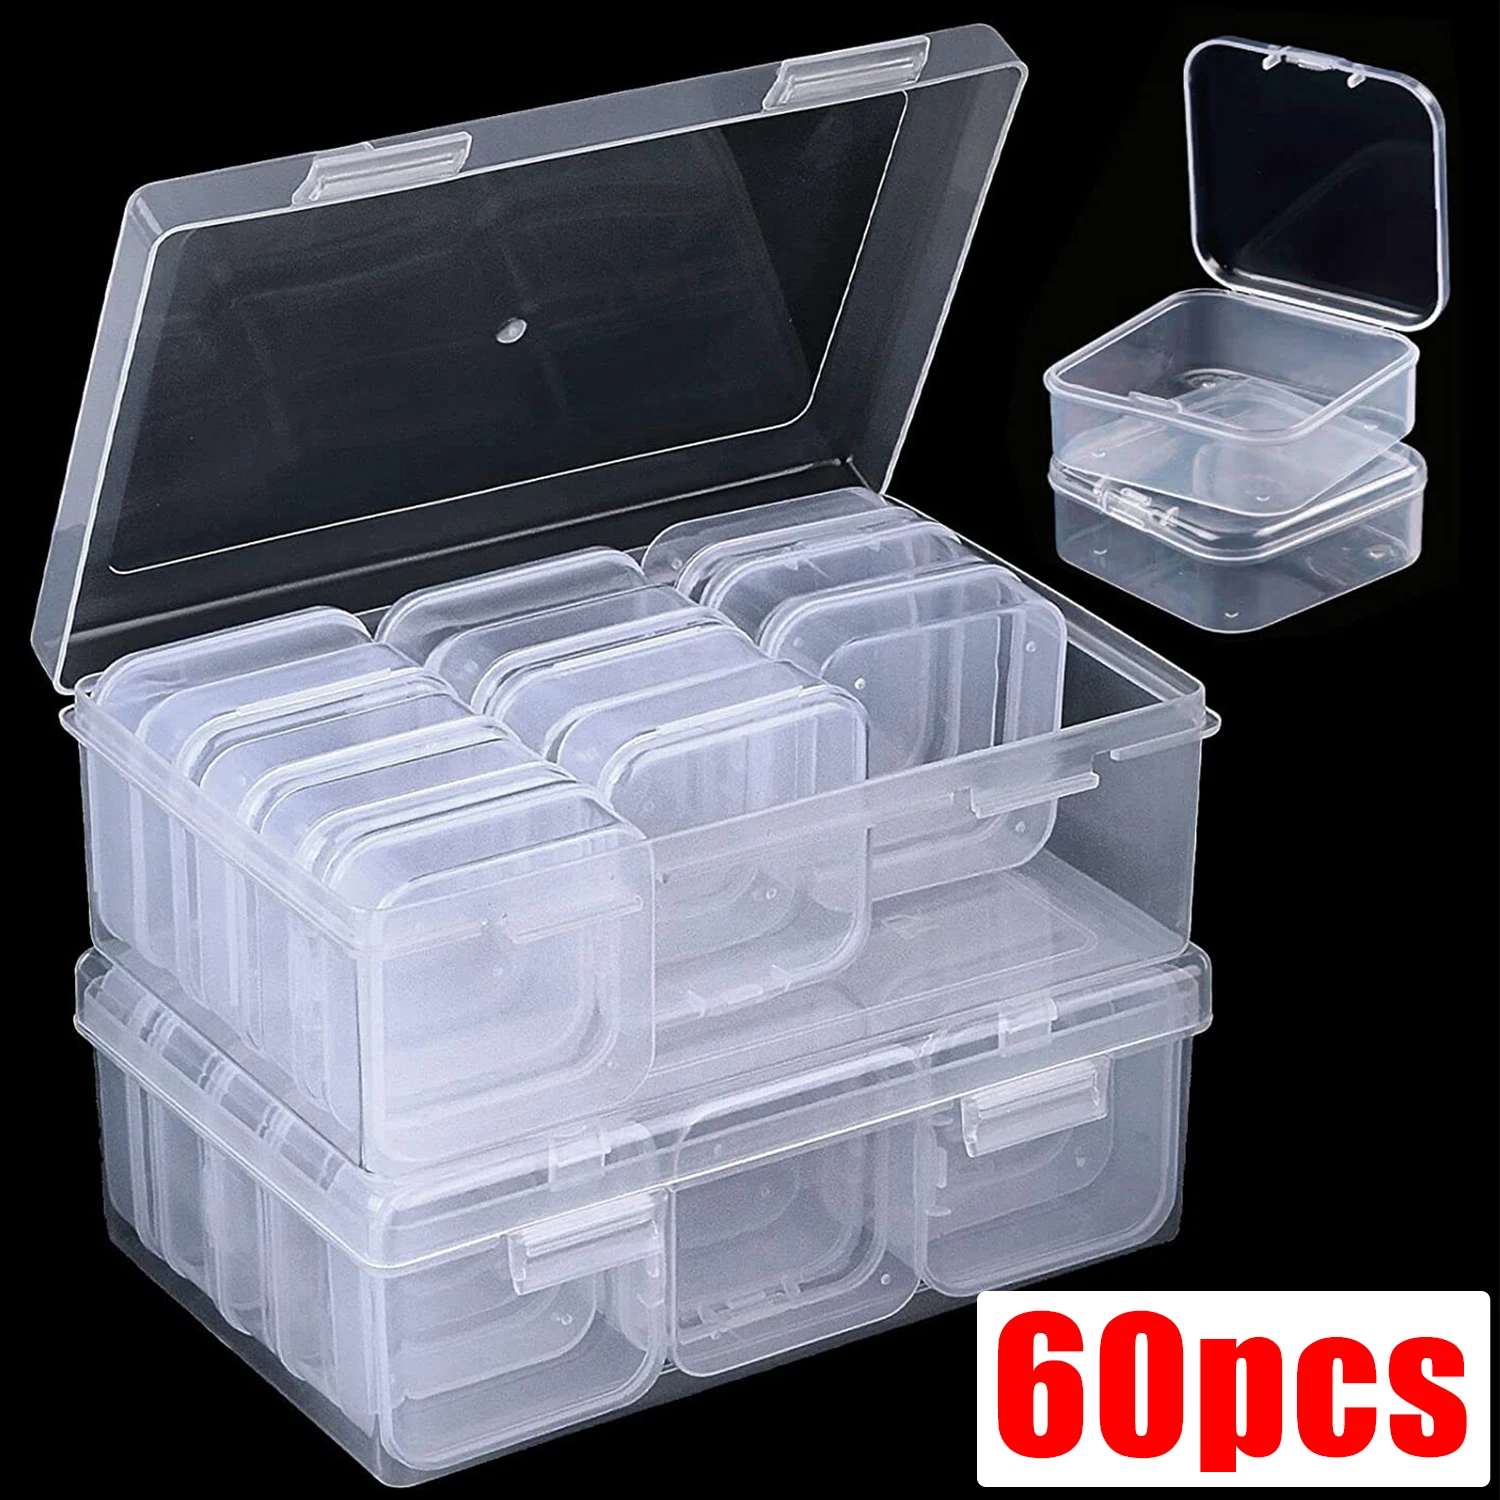 60 Packs Clear Small Plastic Containers Transparent Storage Box with Hinged Lid for Items Crafts Jewelry Package Clear Cases